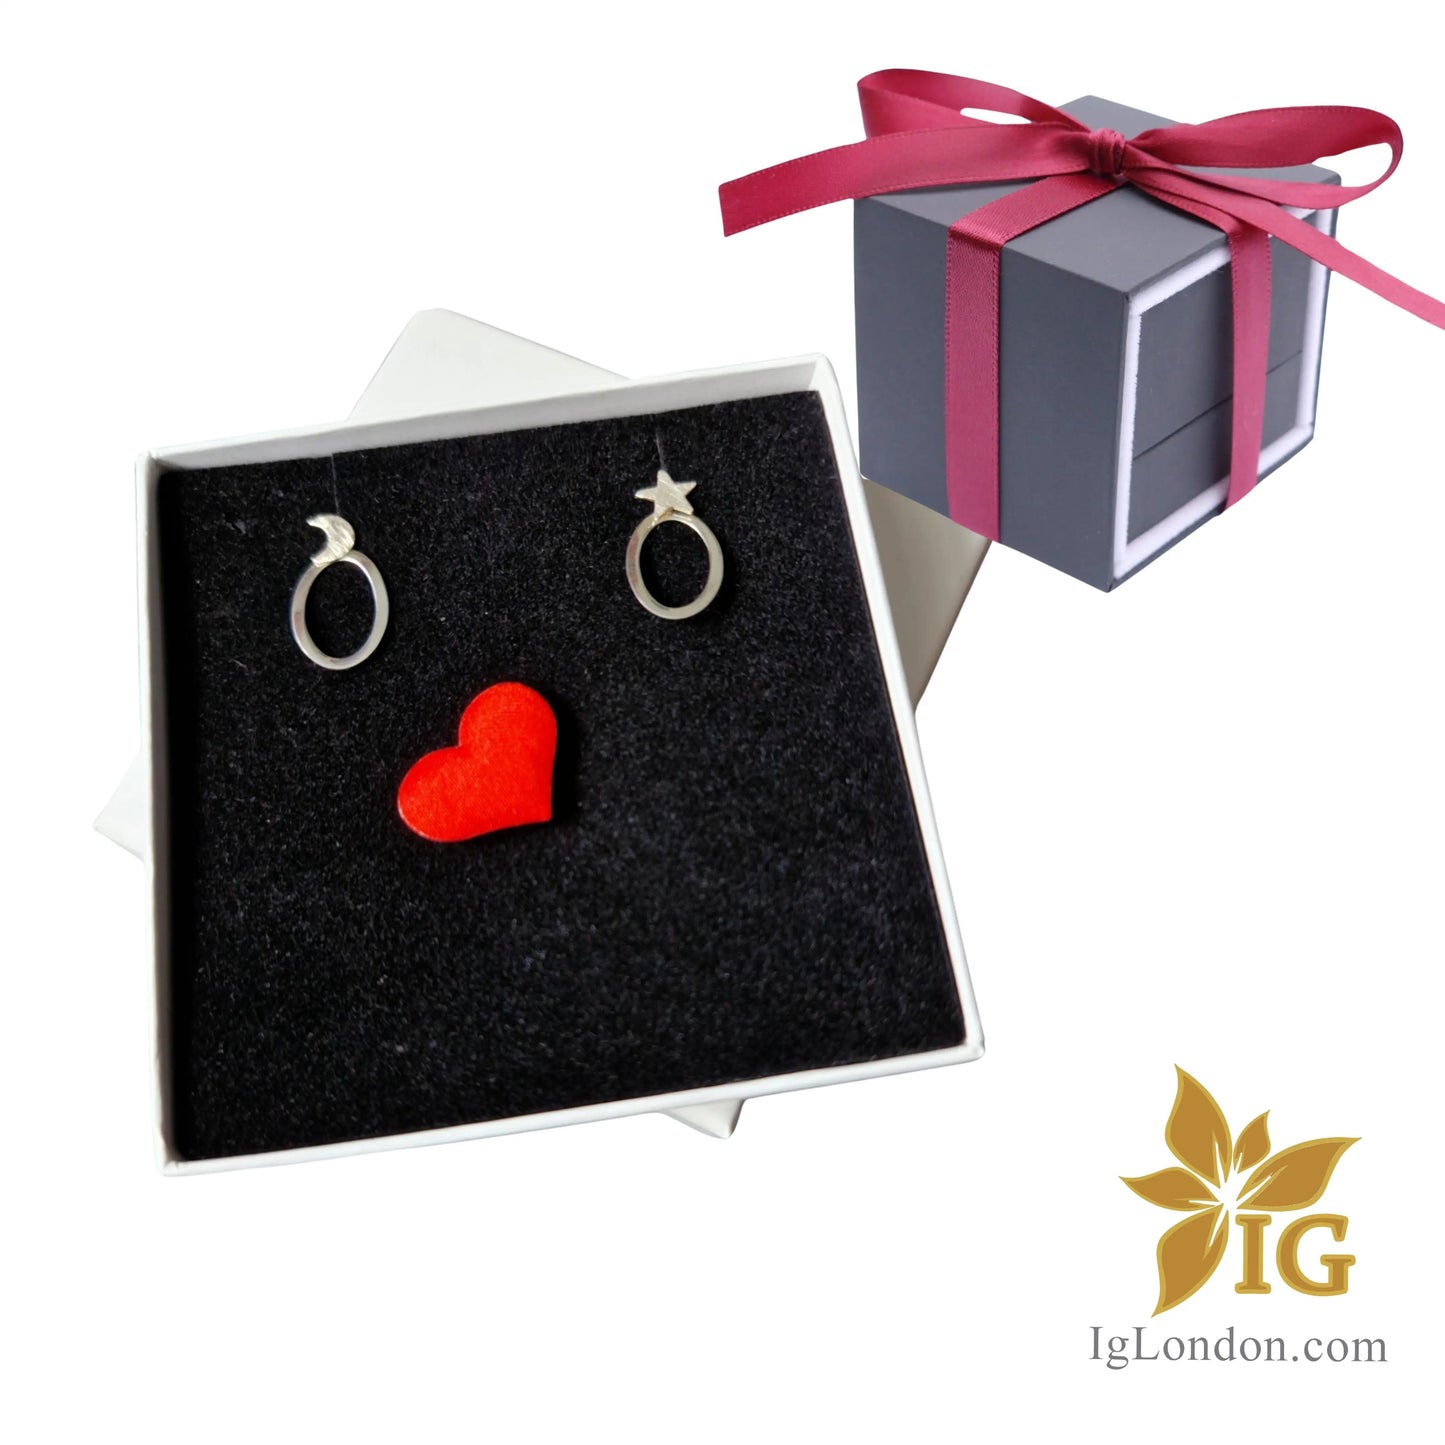 Moon and star earrings studs Arrives elegantly boxed, plus personalized message card. It’s ready to give and cherish.